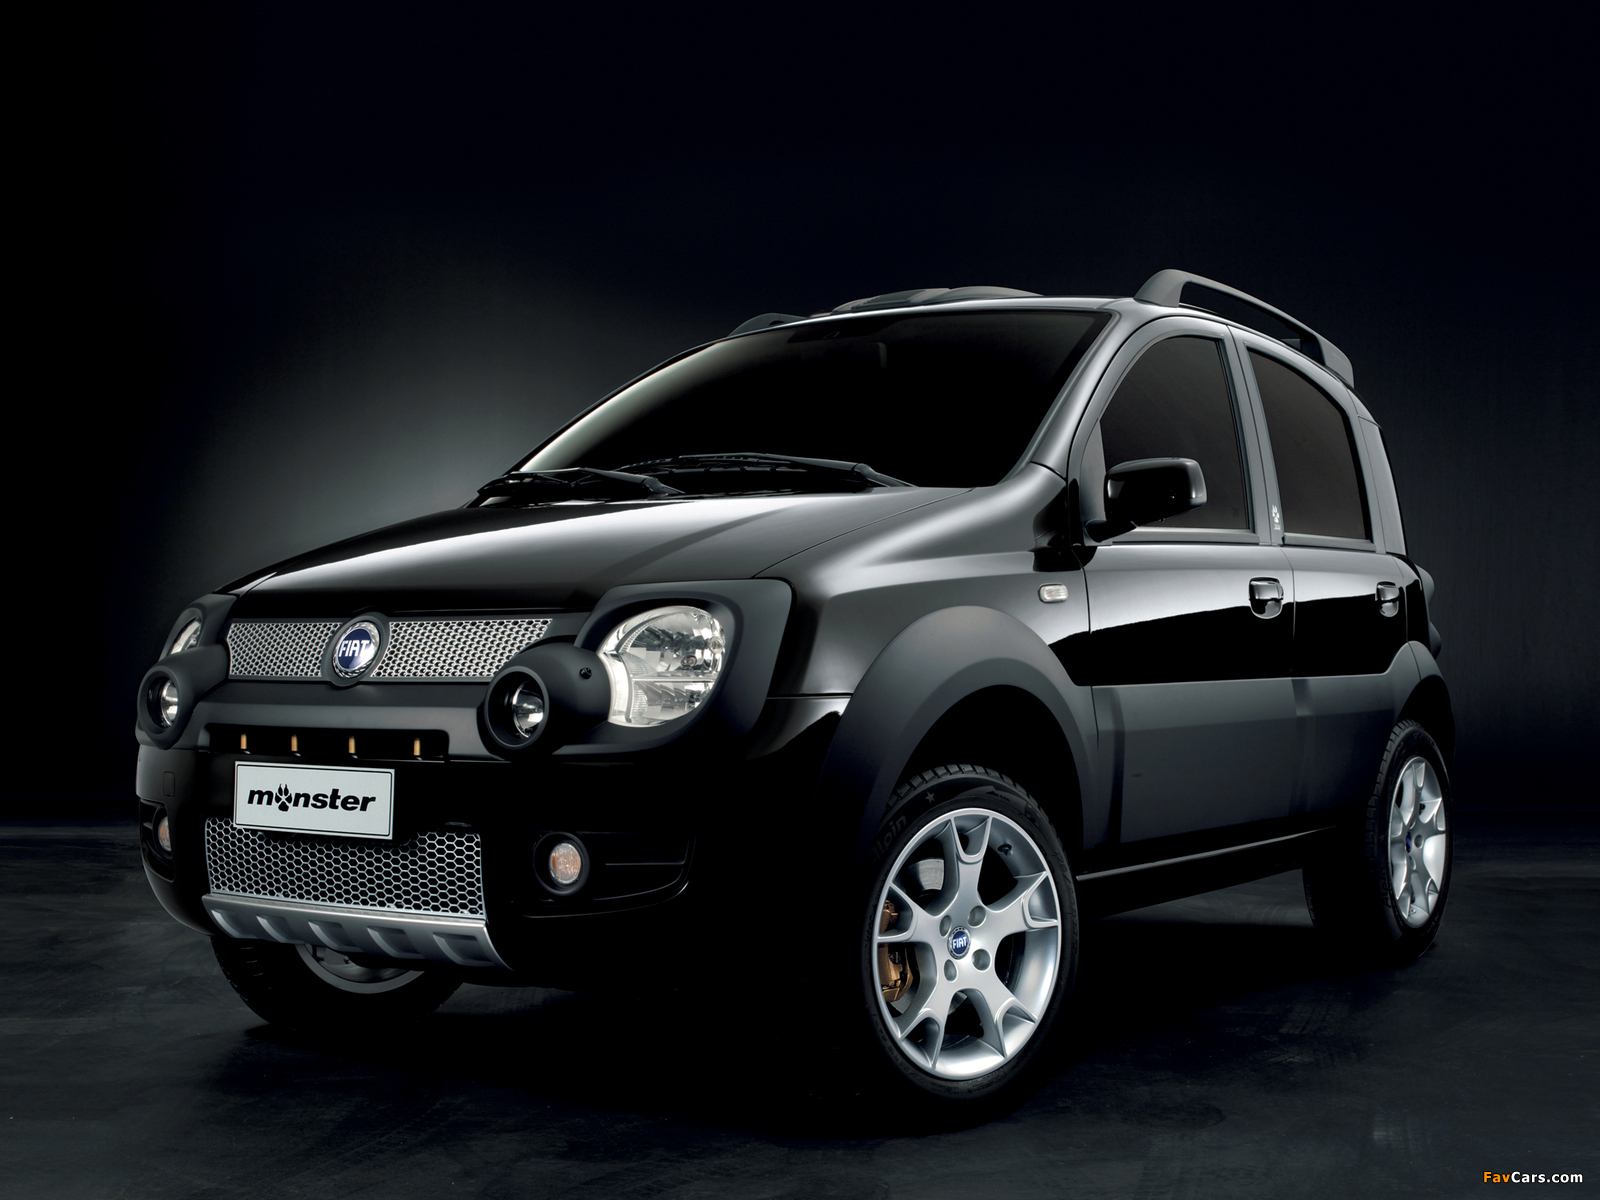 Fiat Panda 4x4 Monster (169) 2006 pictures (1600 x 1200)